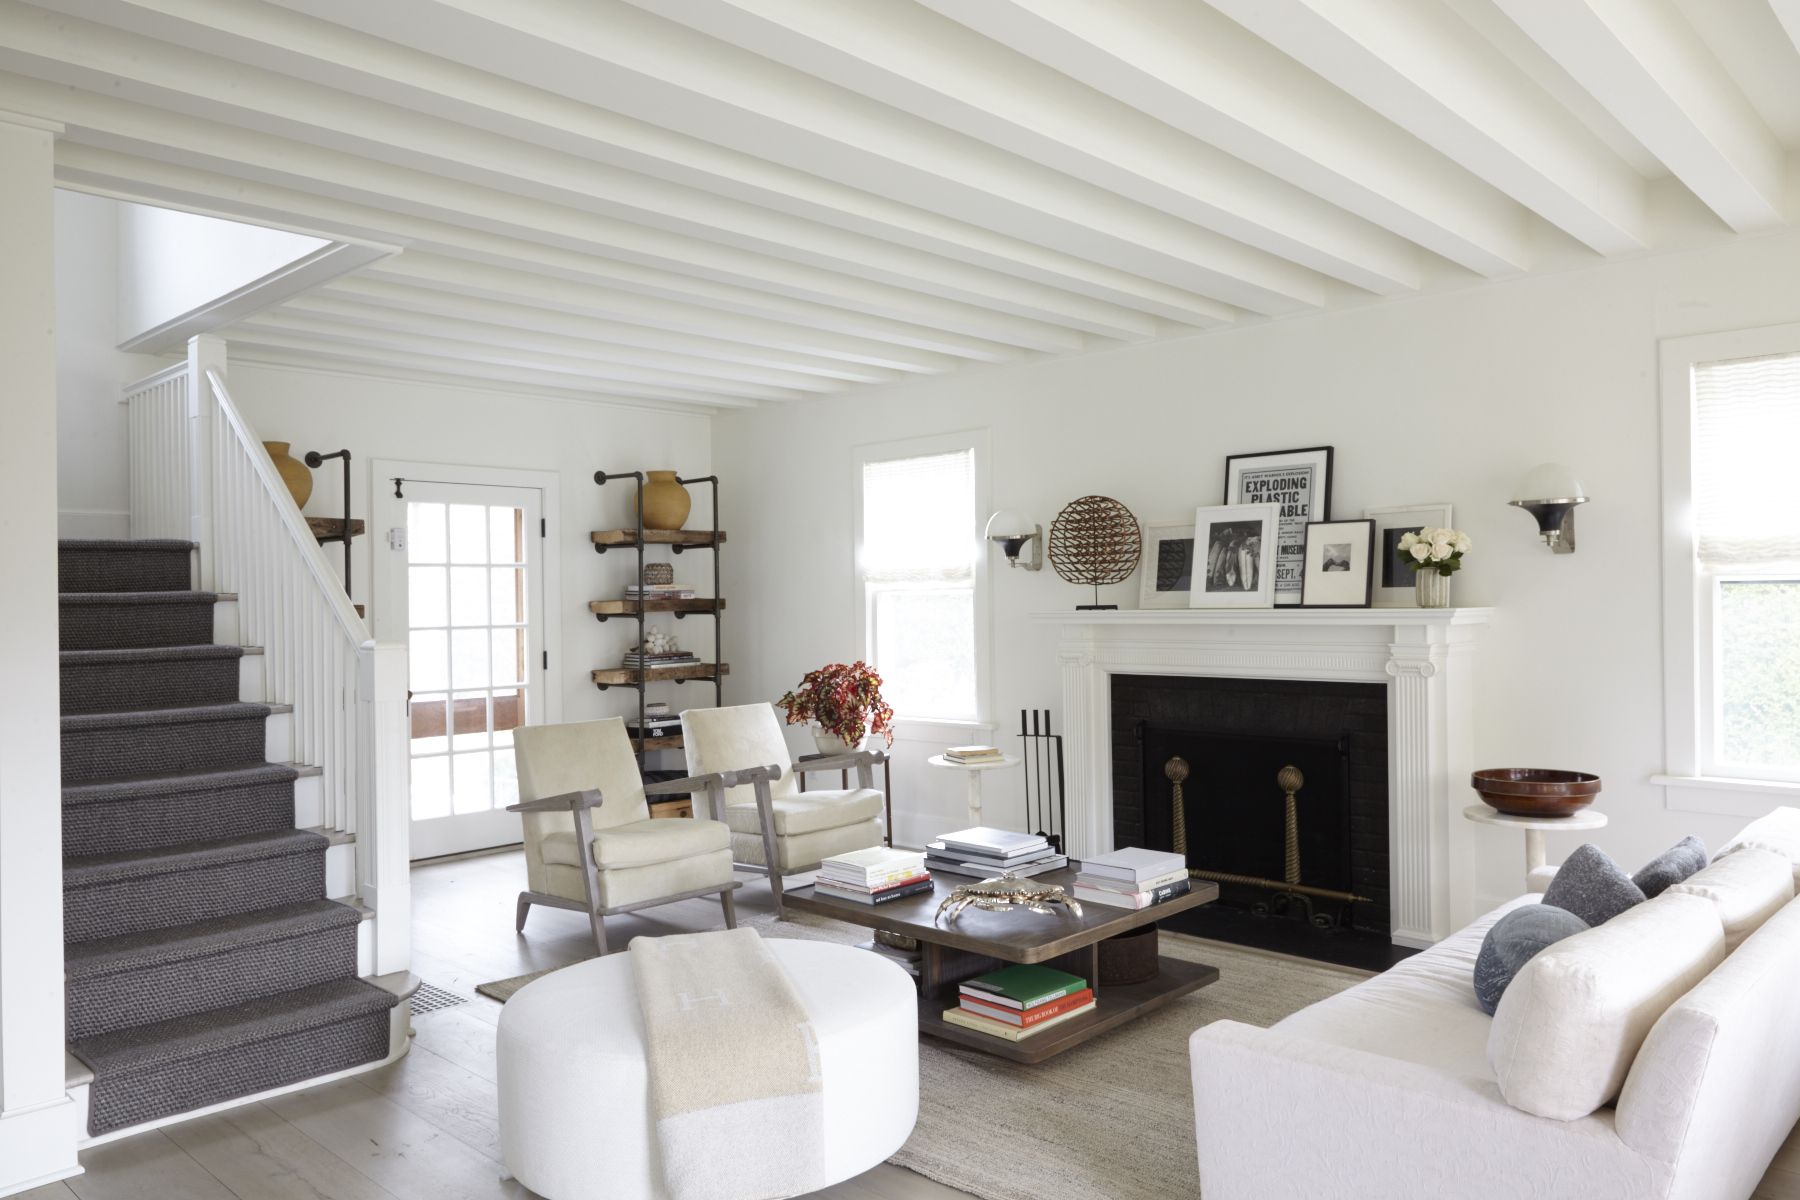 14 Best Modern Farmhouse Living Room Ideas To Try In 2020